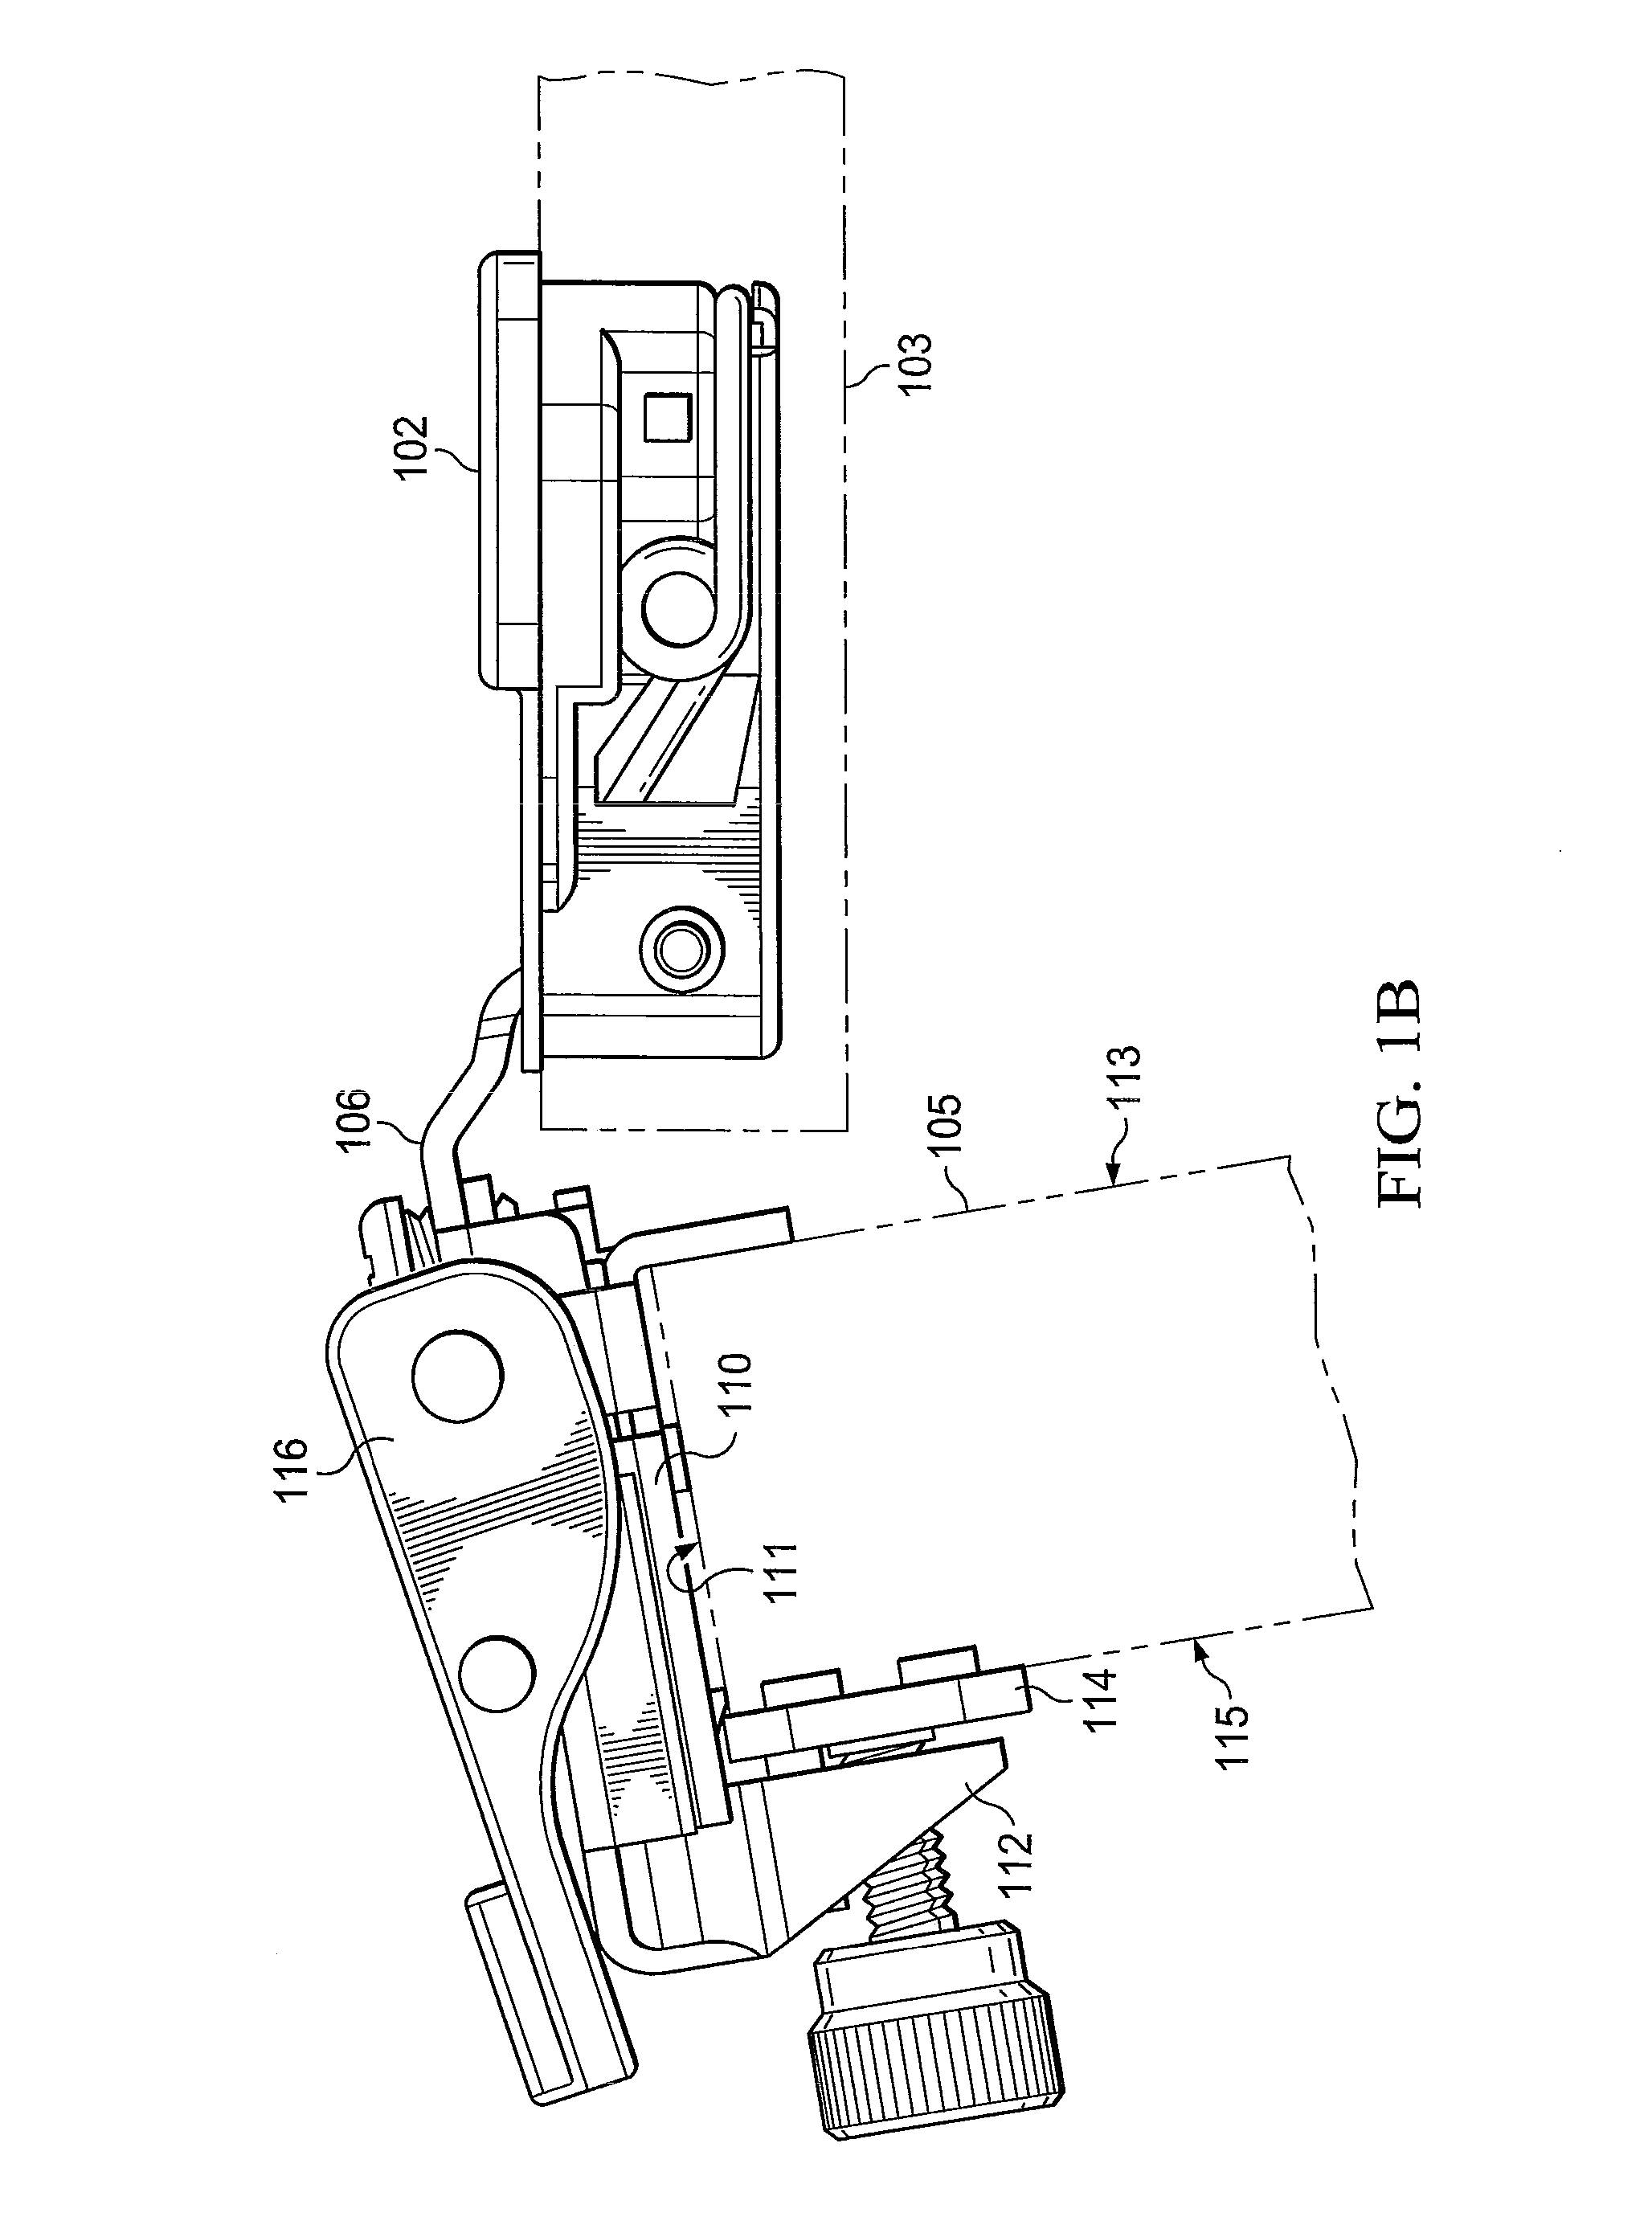 Removable compact hinge and method of use